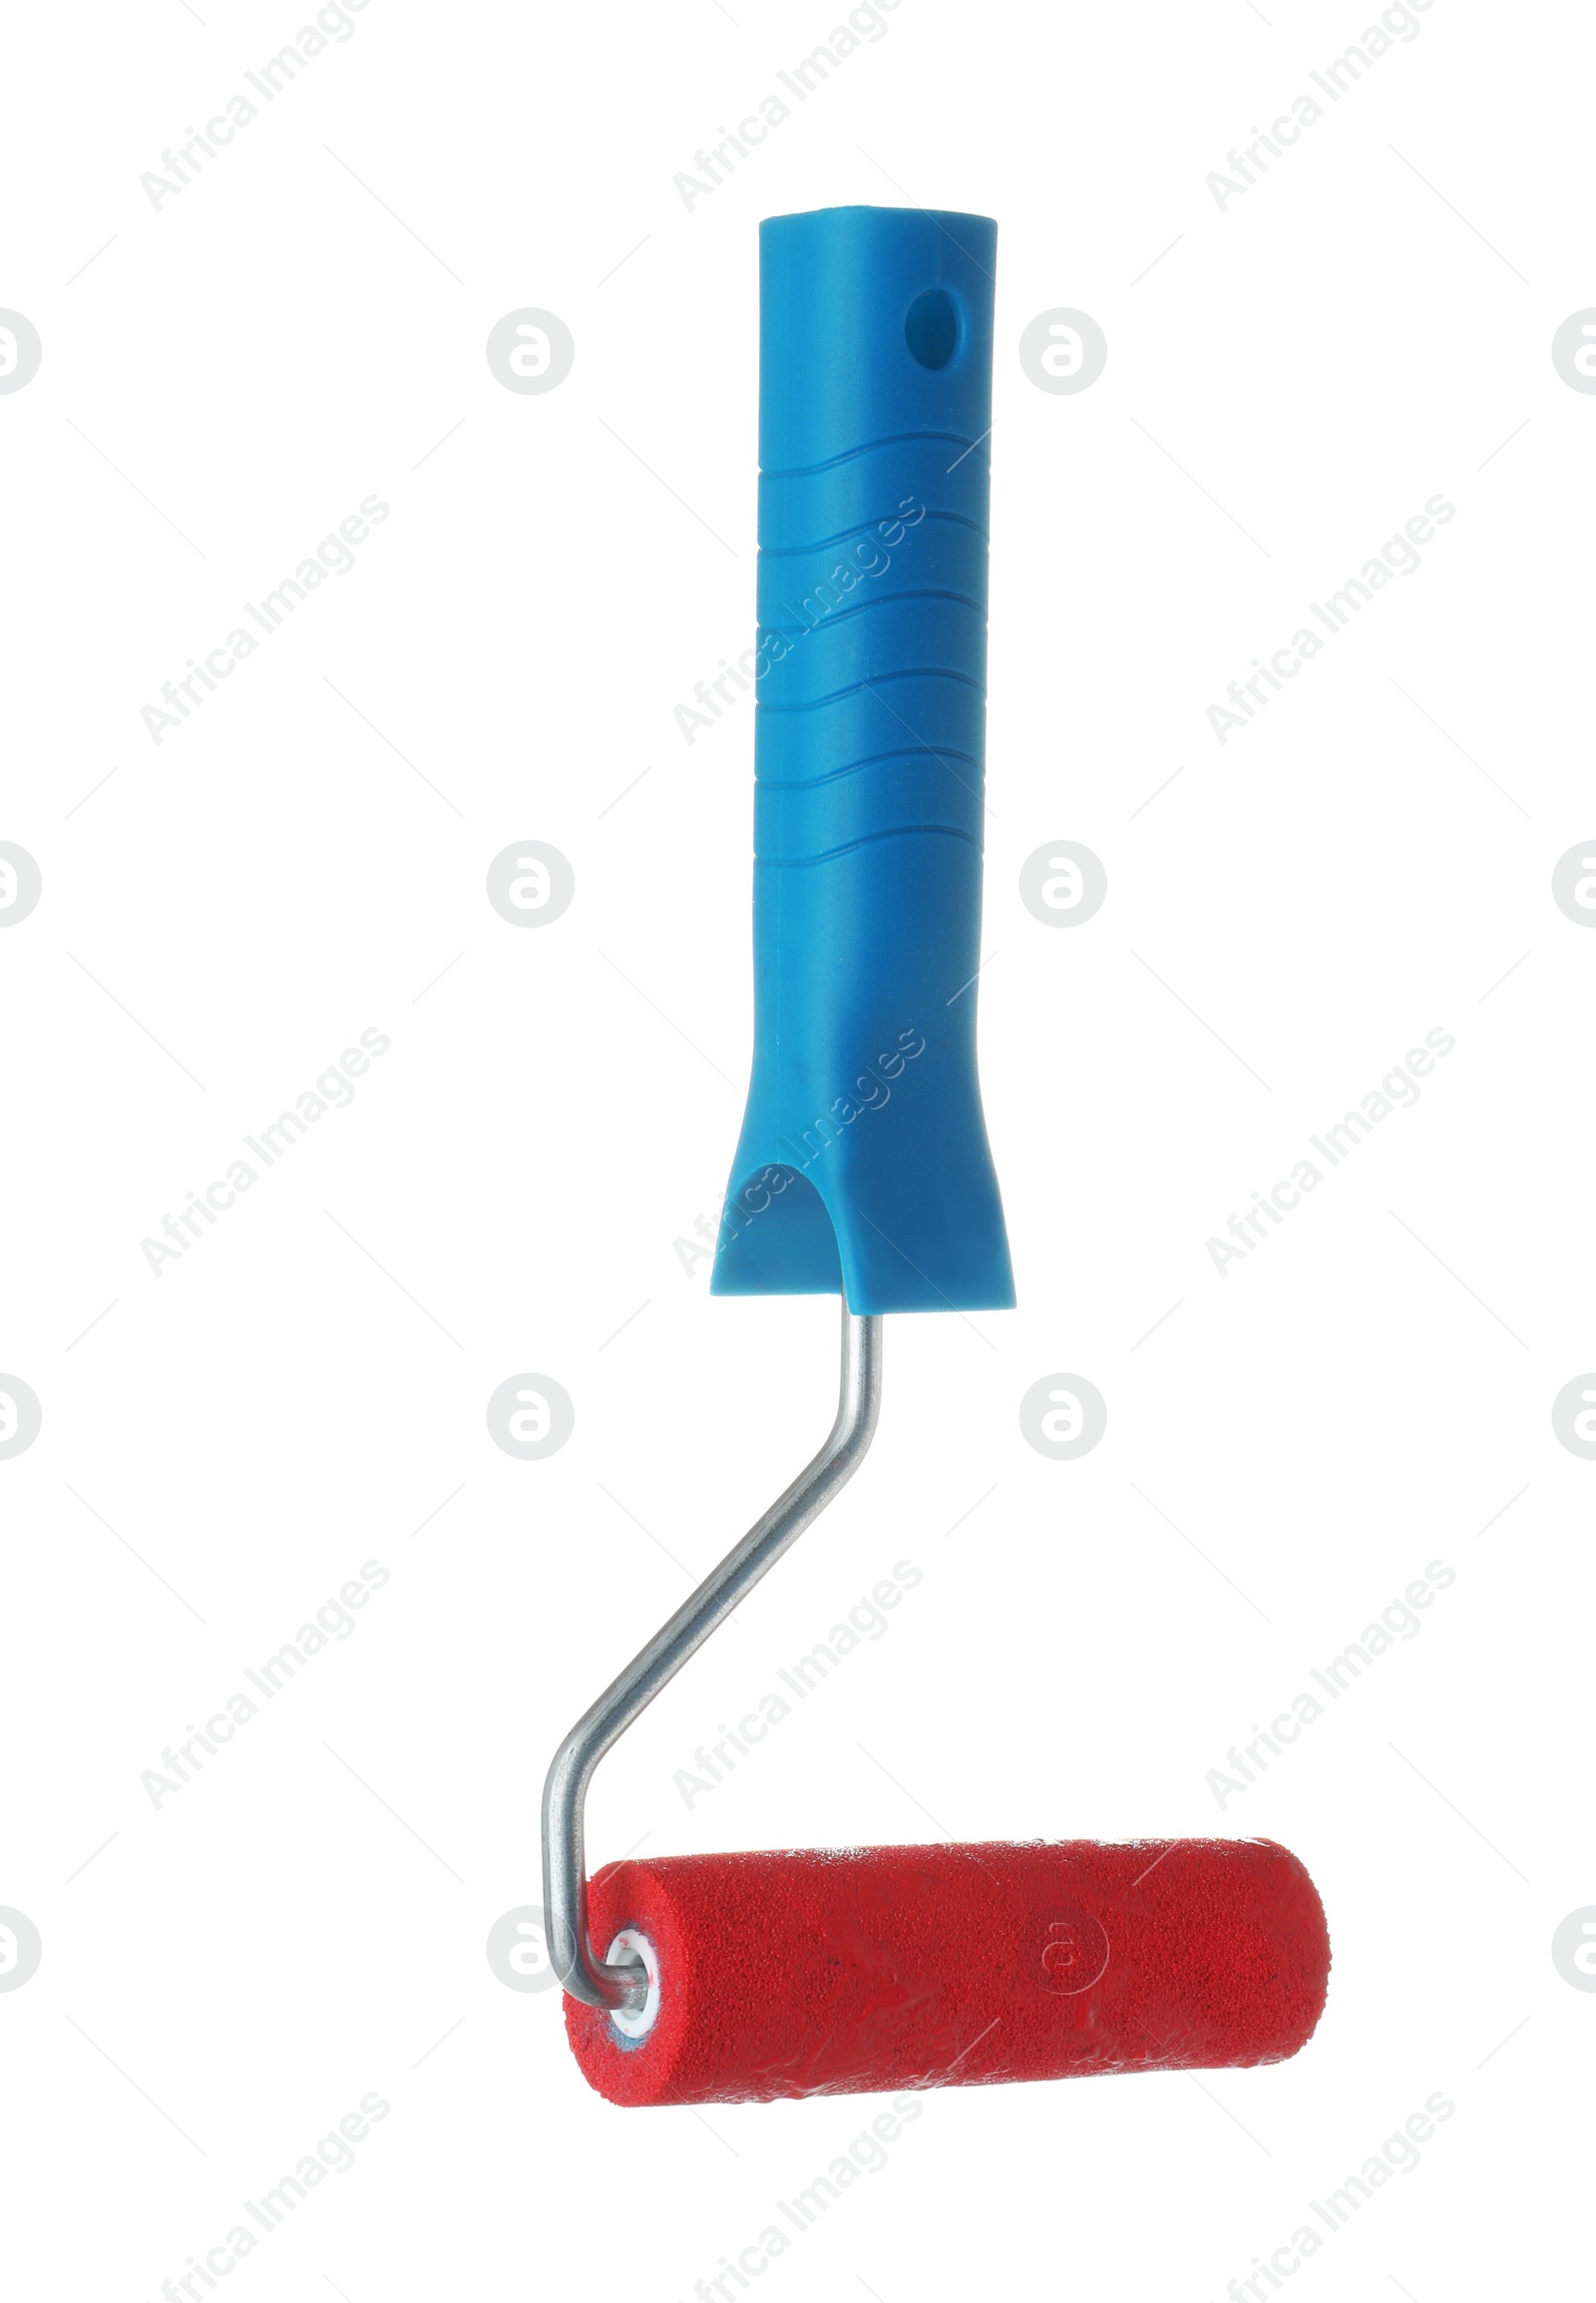 Photo of Roller brush with red paint on white background